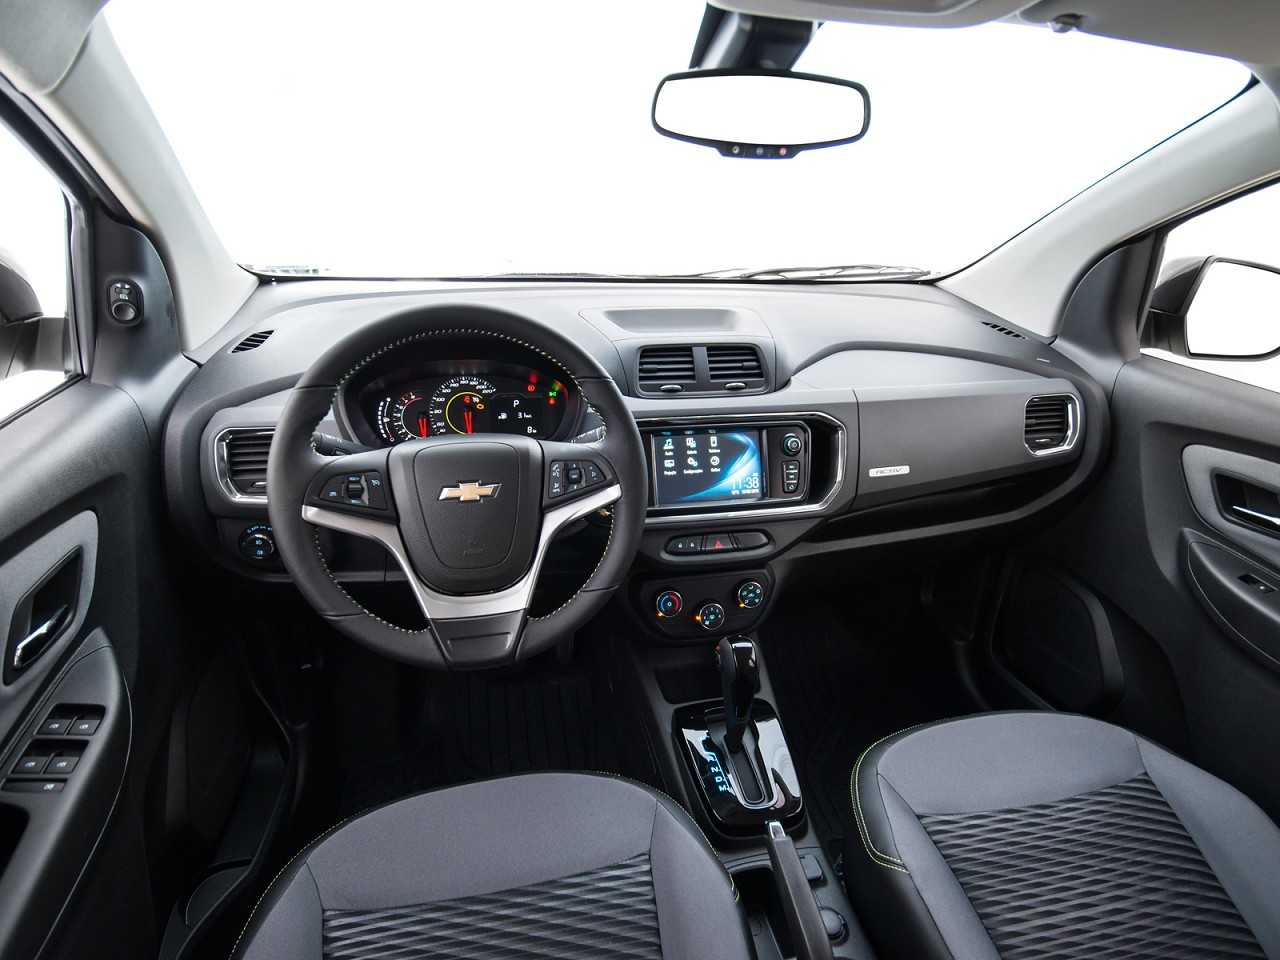 ChevroletSpin 2019 - painel